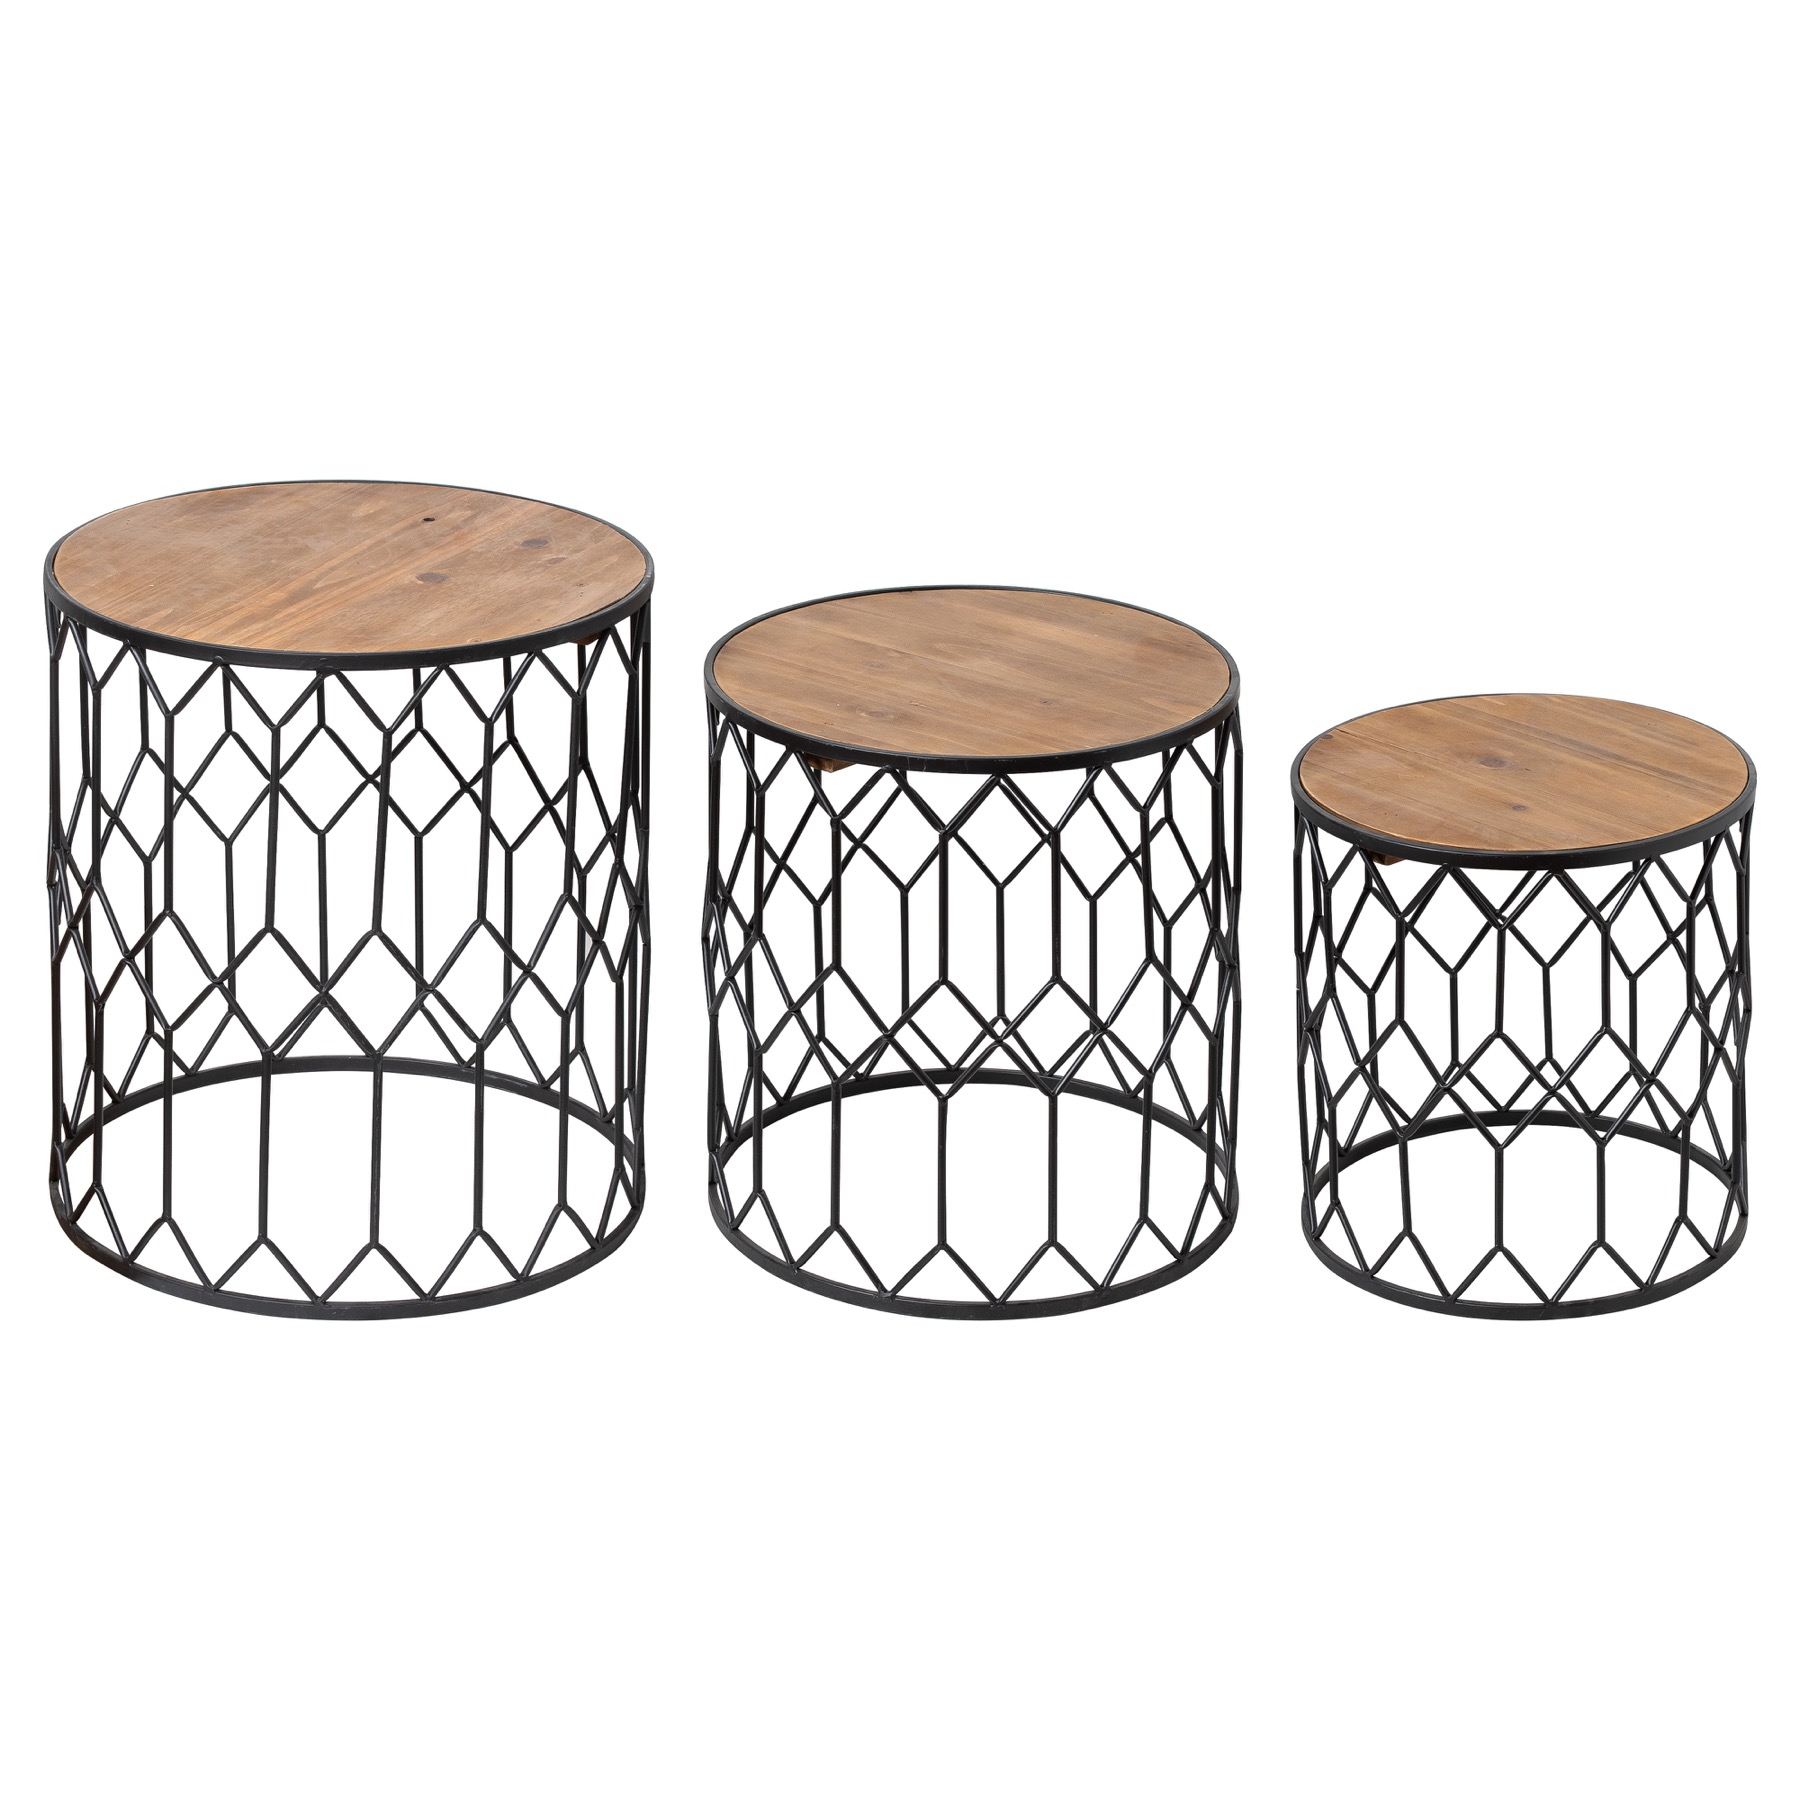 Set Of Three Honeycomb Side Tables - Image 1